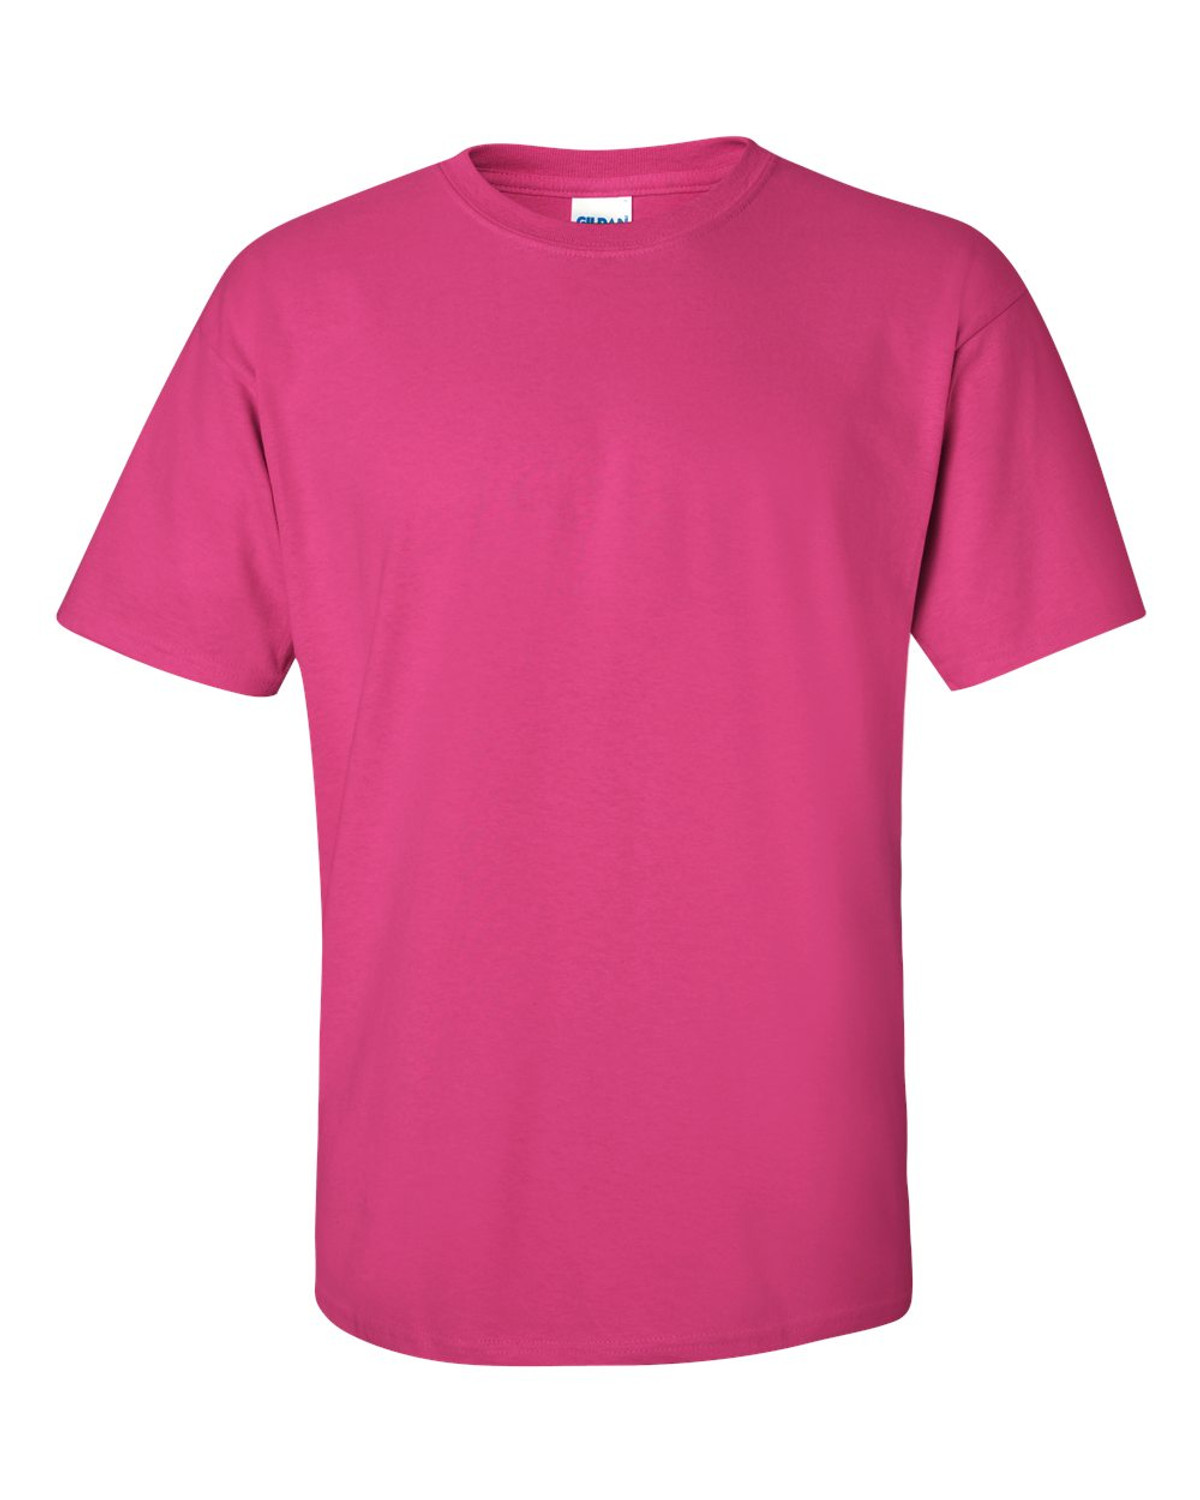 Ultra cotton™ adult t-shirt Up to 5XL